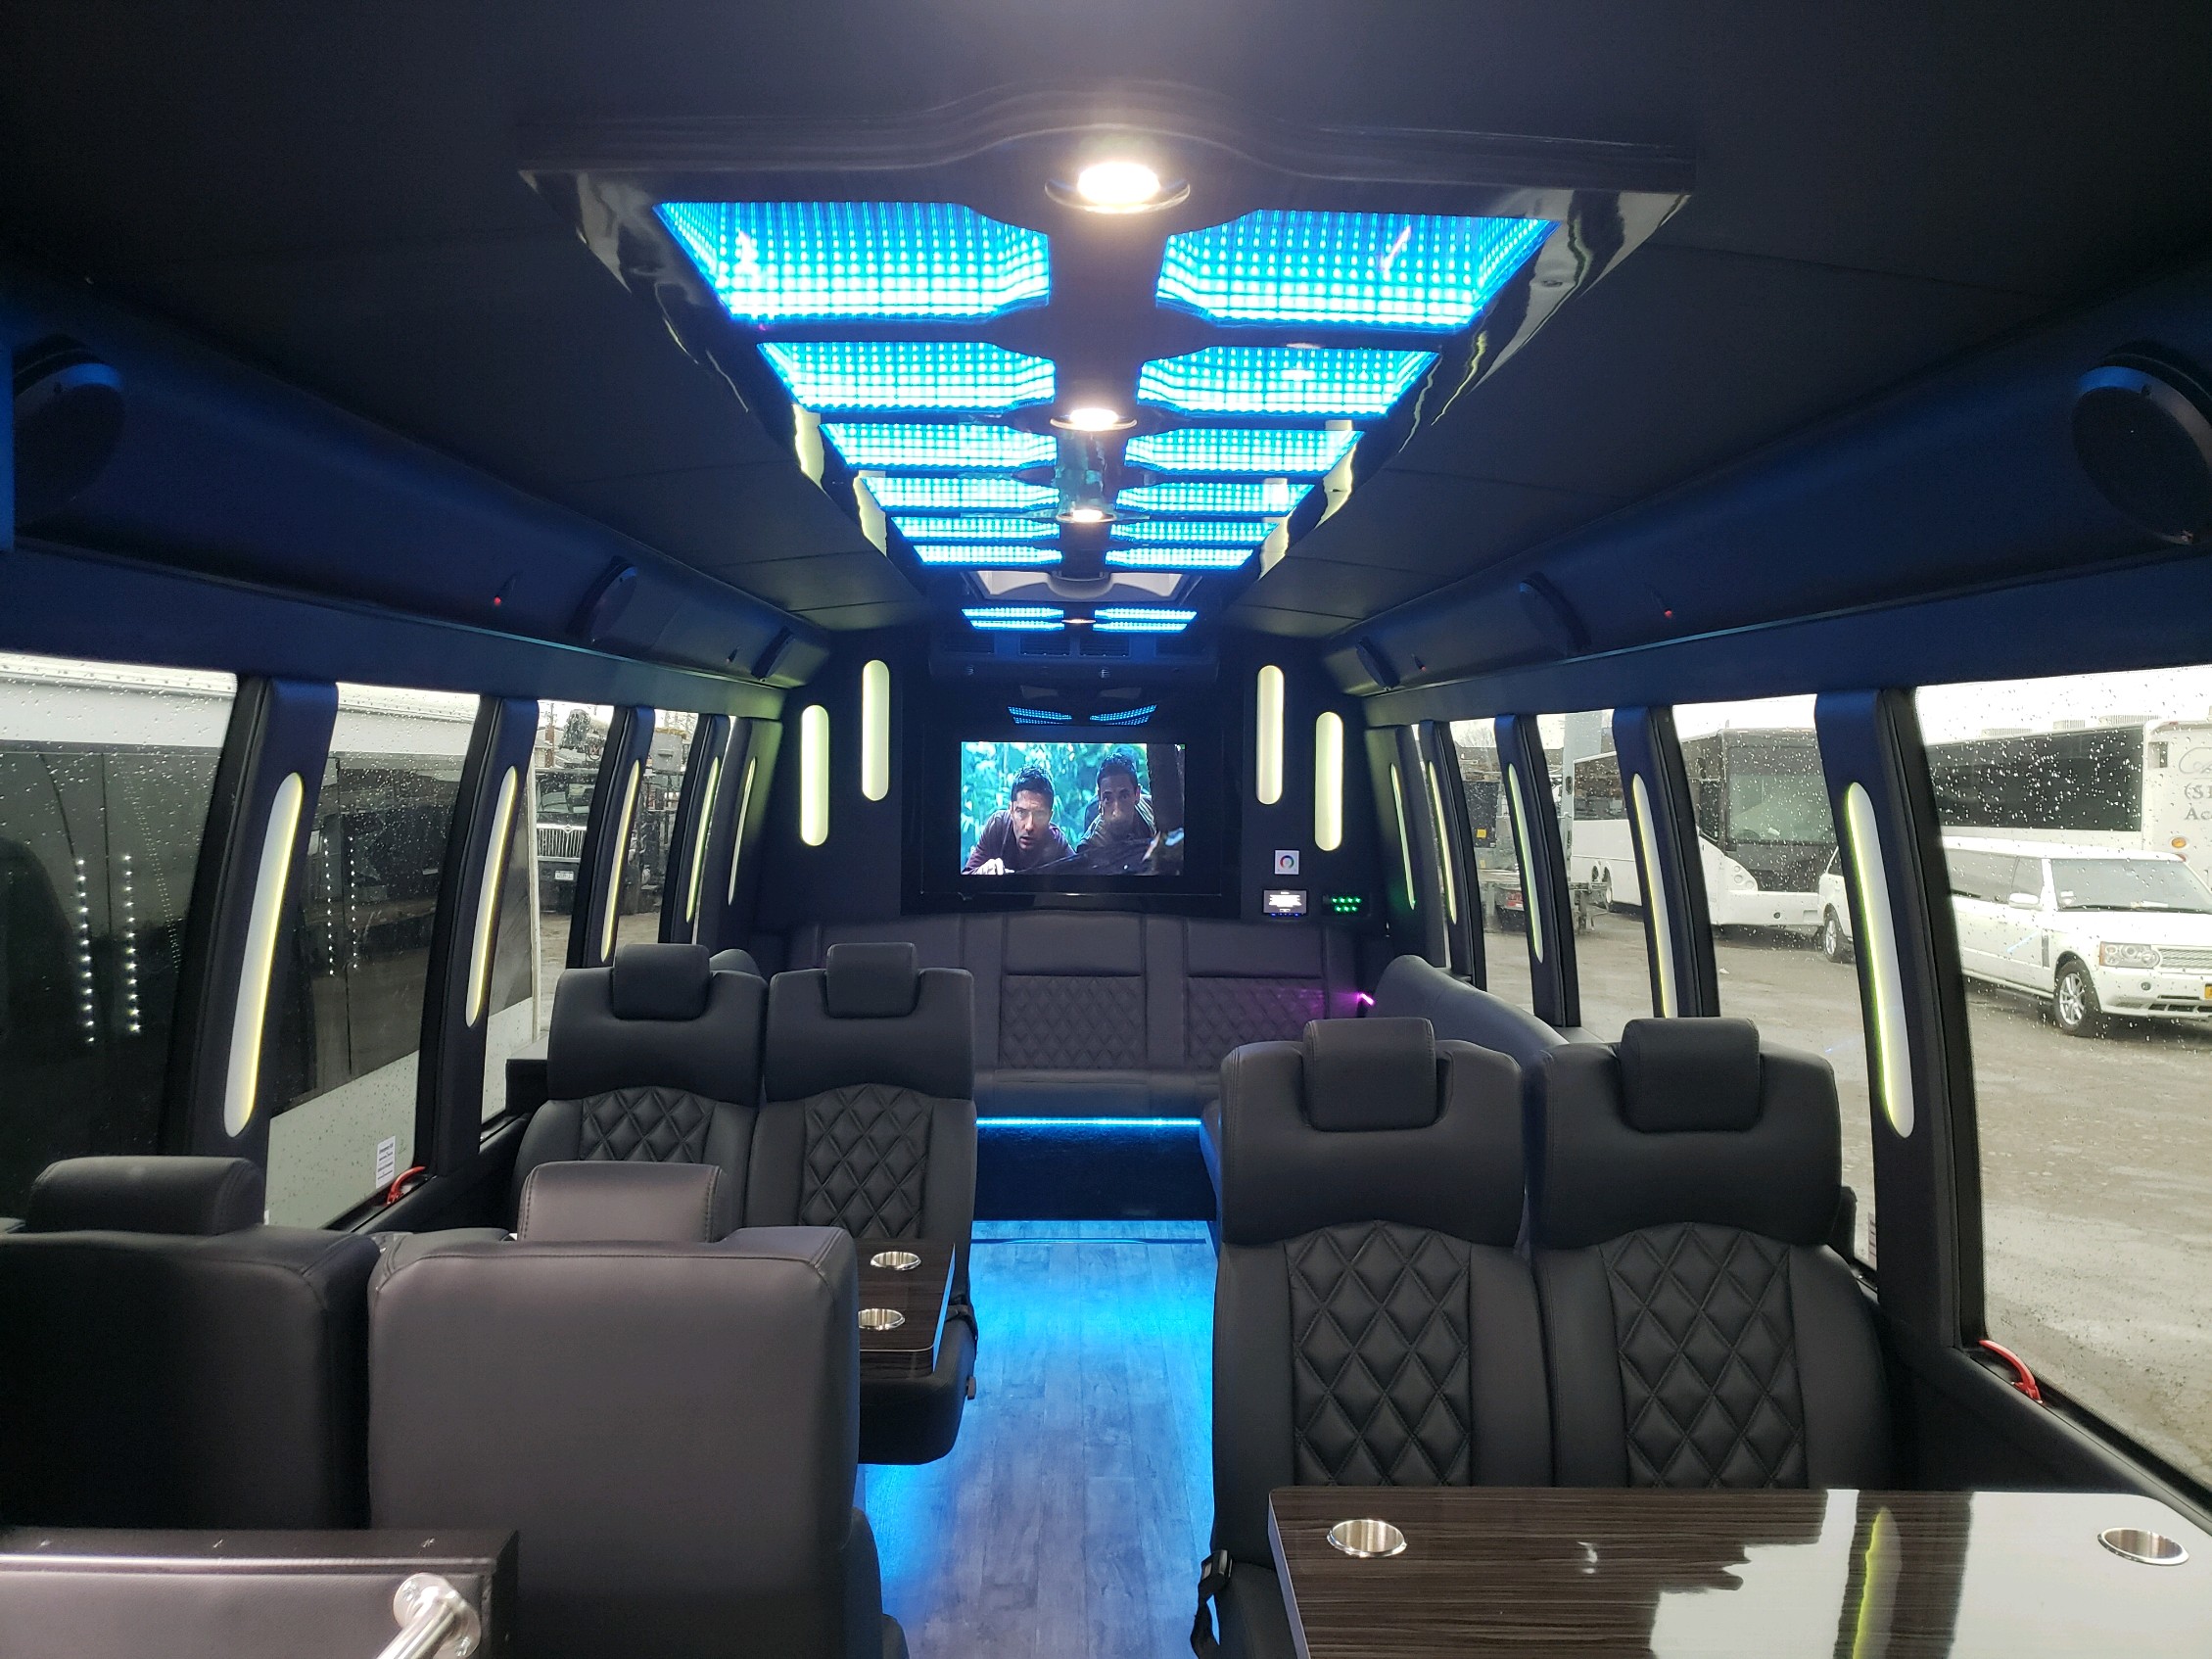 Party Bus Interior lights and tv